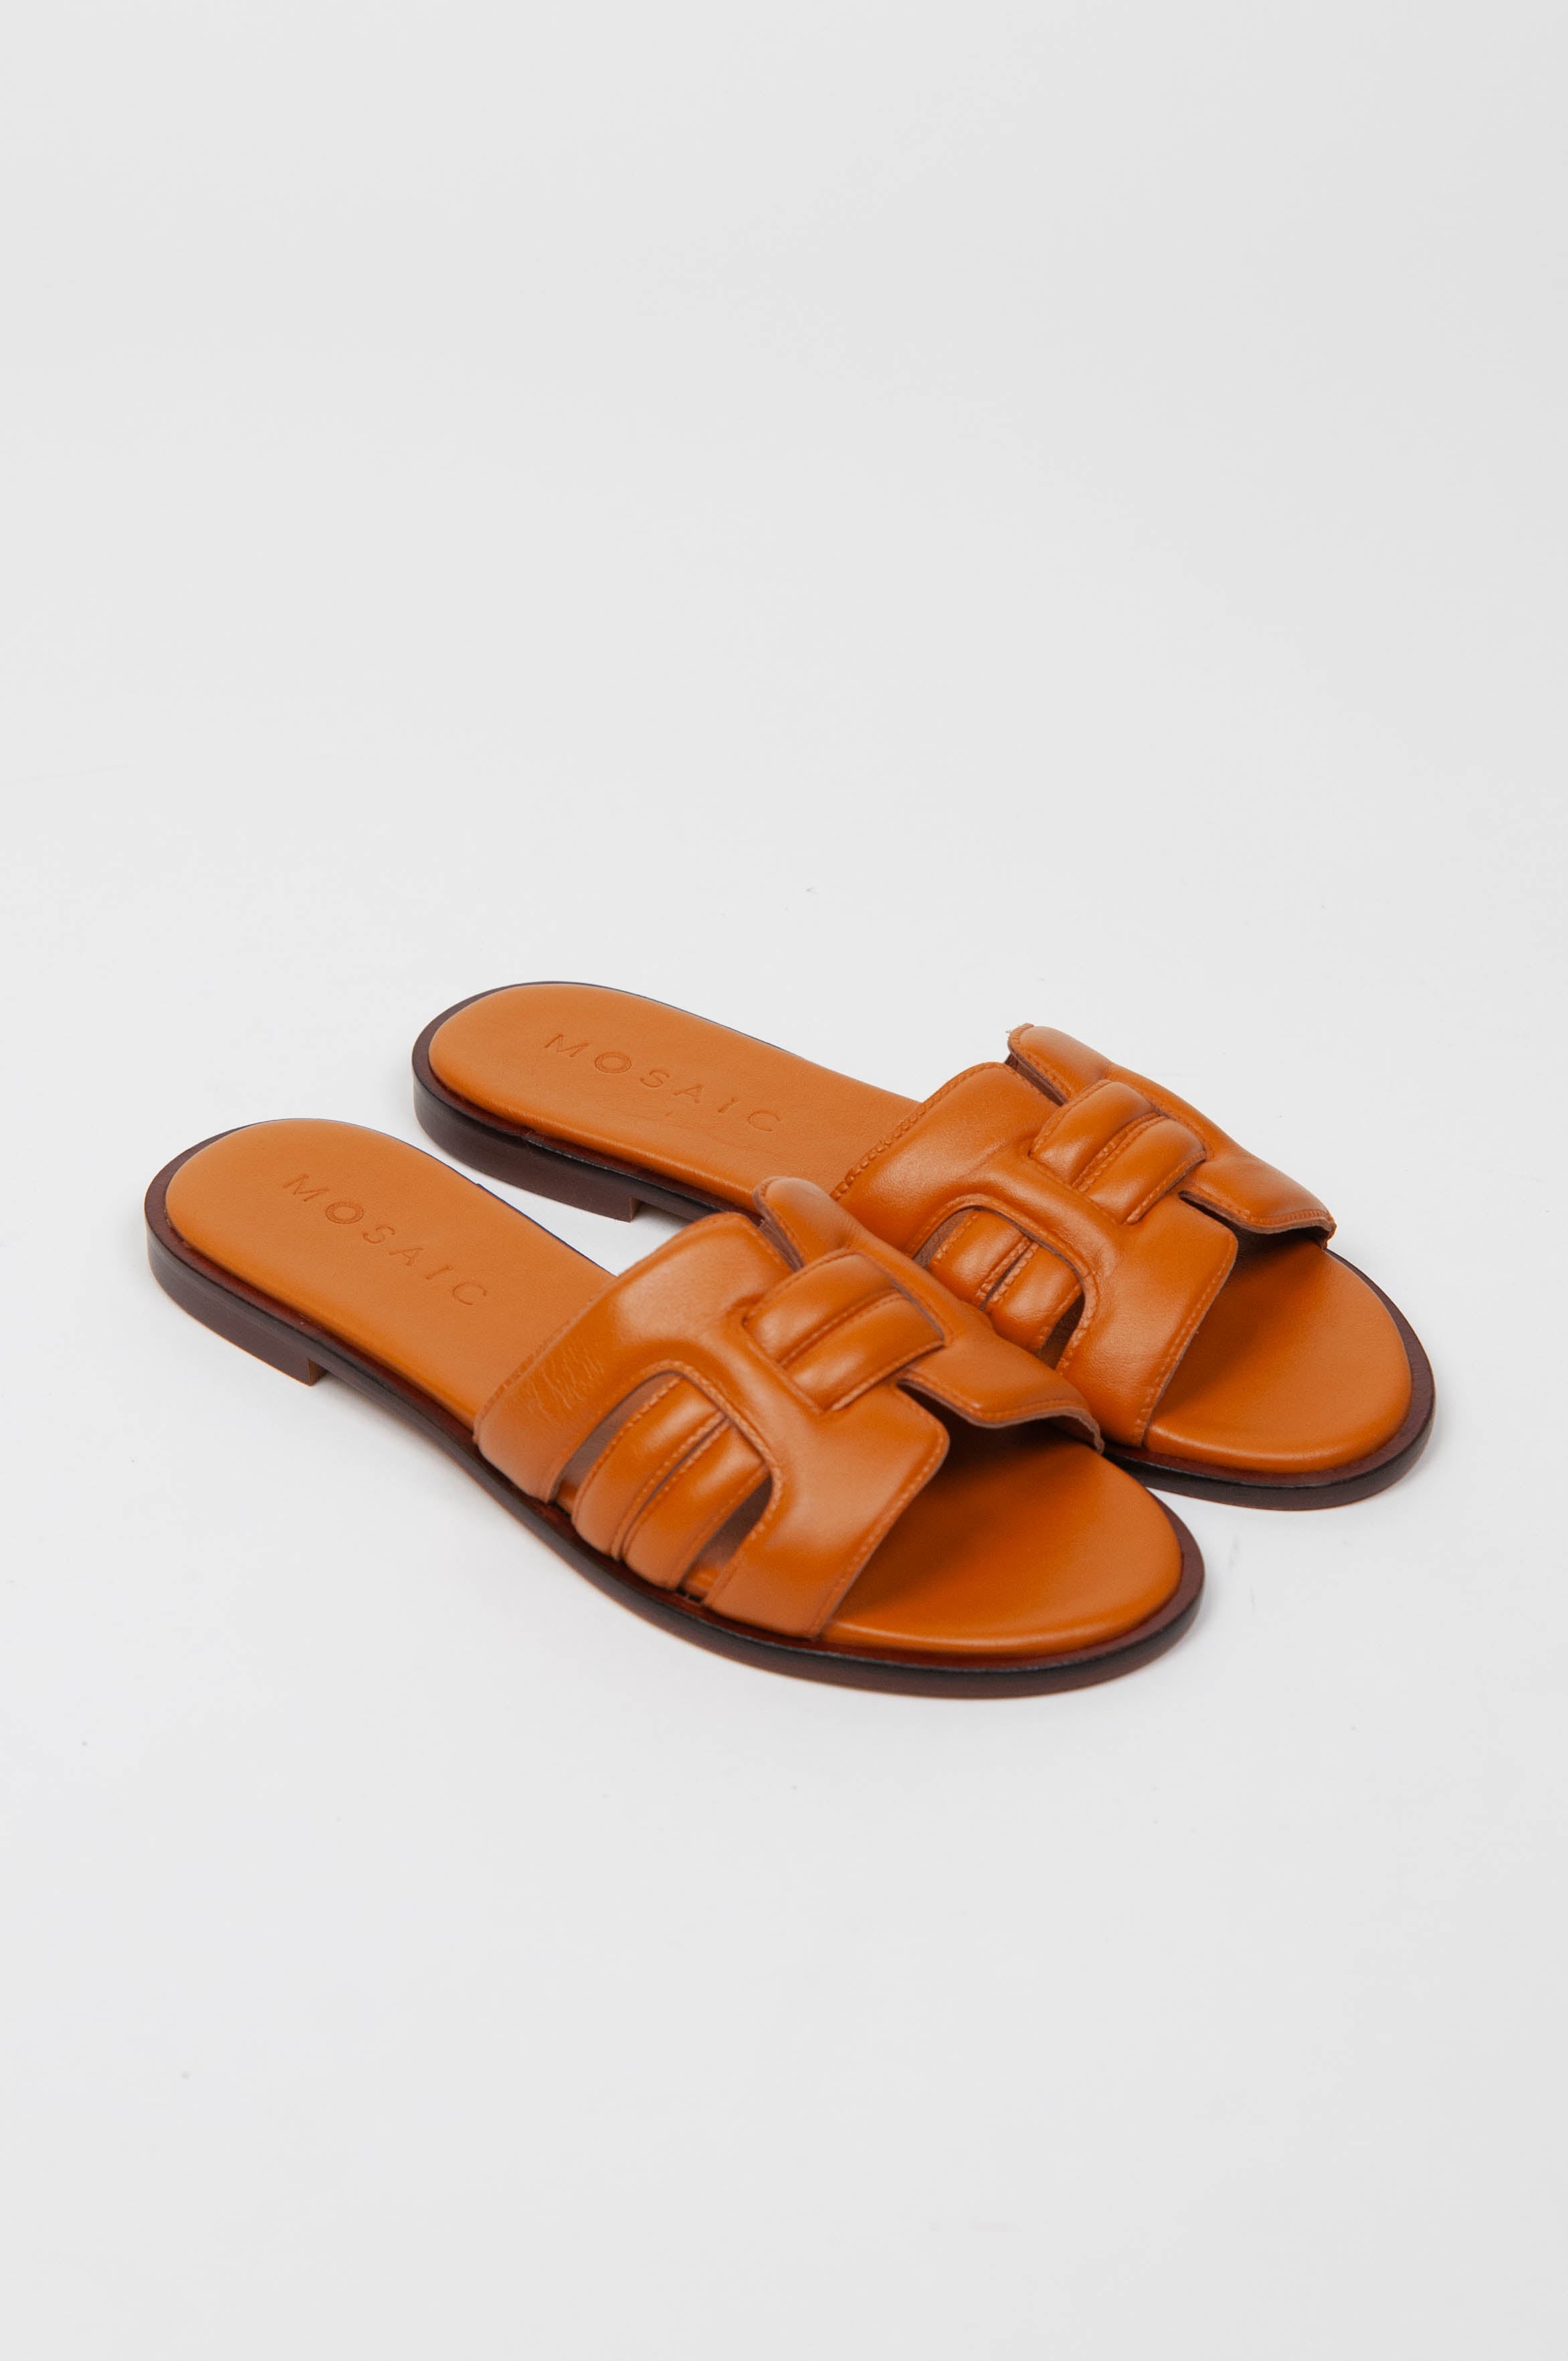 Mosaic - Slip-on sandal with leather band